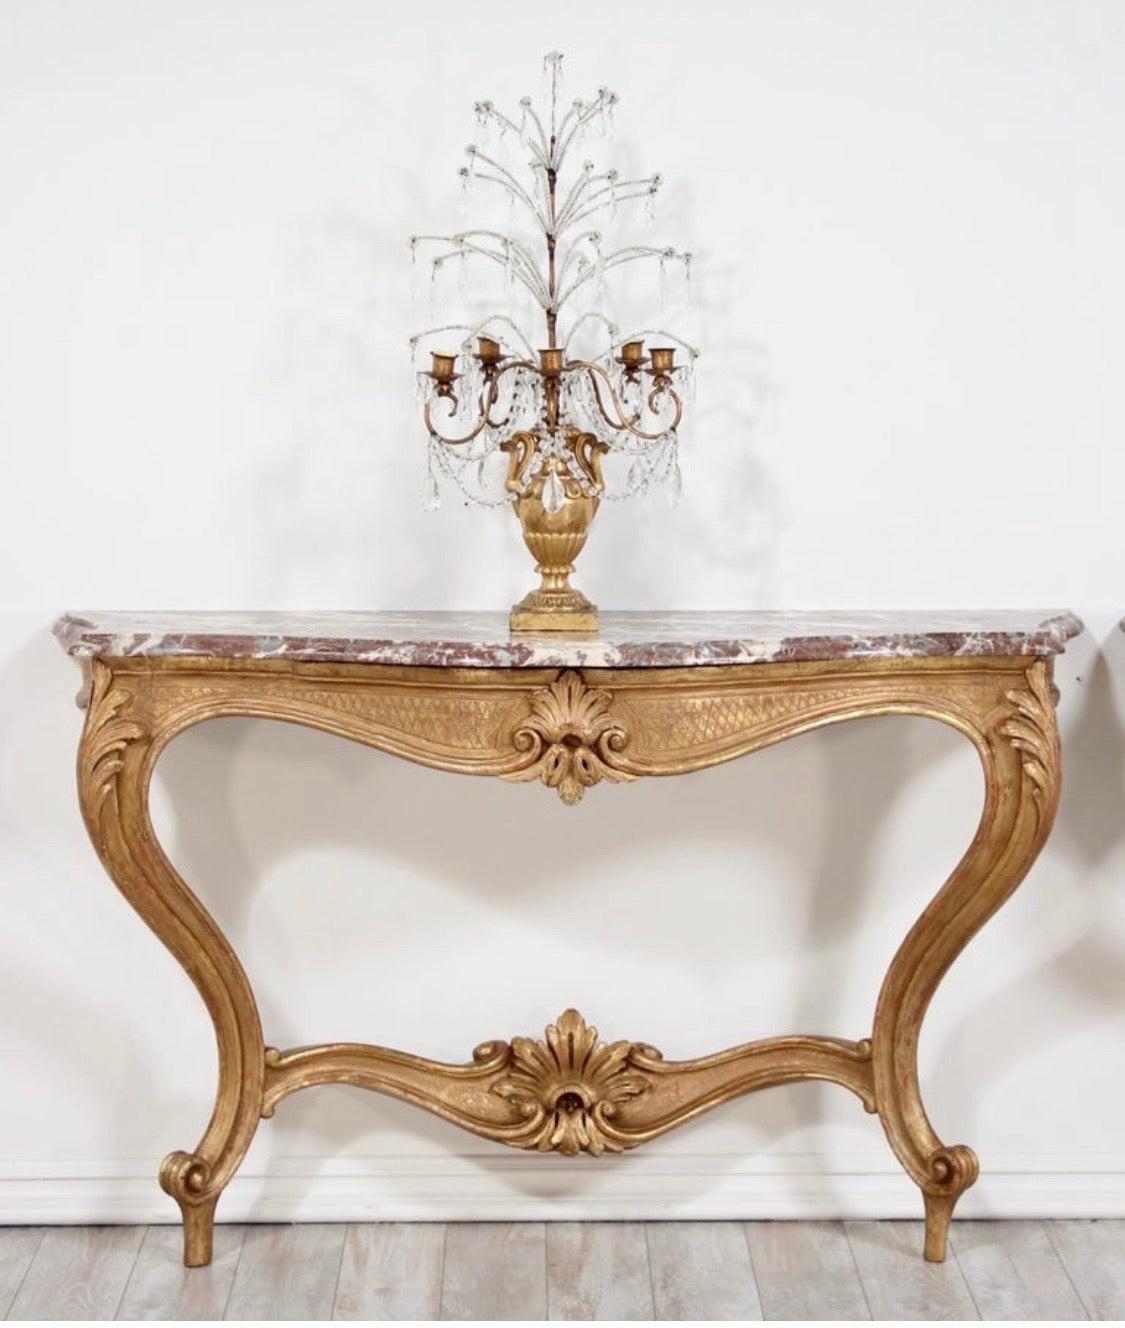 Fantastic, pair of early 20th century Italian Louis XV style carved gilt-wood console tables with marble tops.

These antique consoles feature beautifully carved gilt details including curvaceous cabriole legs, rocaille stretchers and cartouche